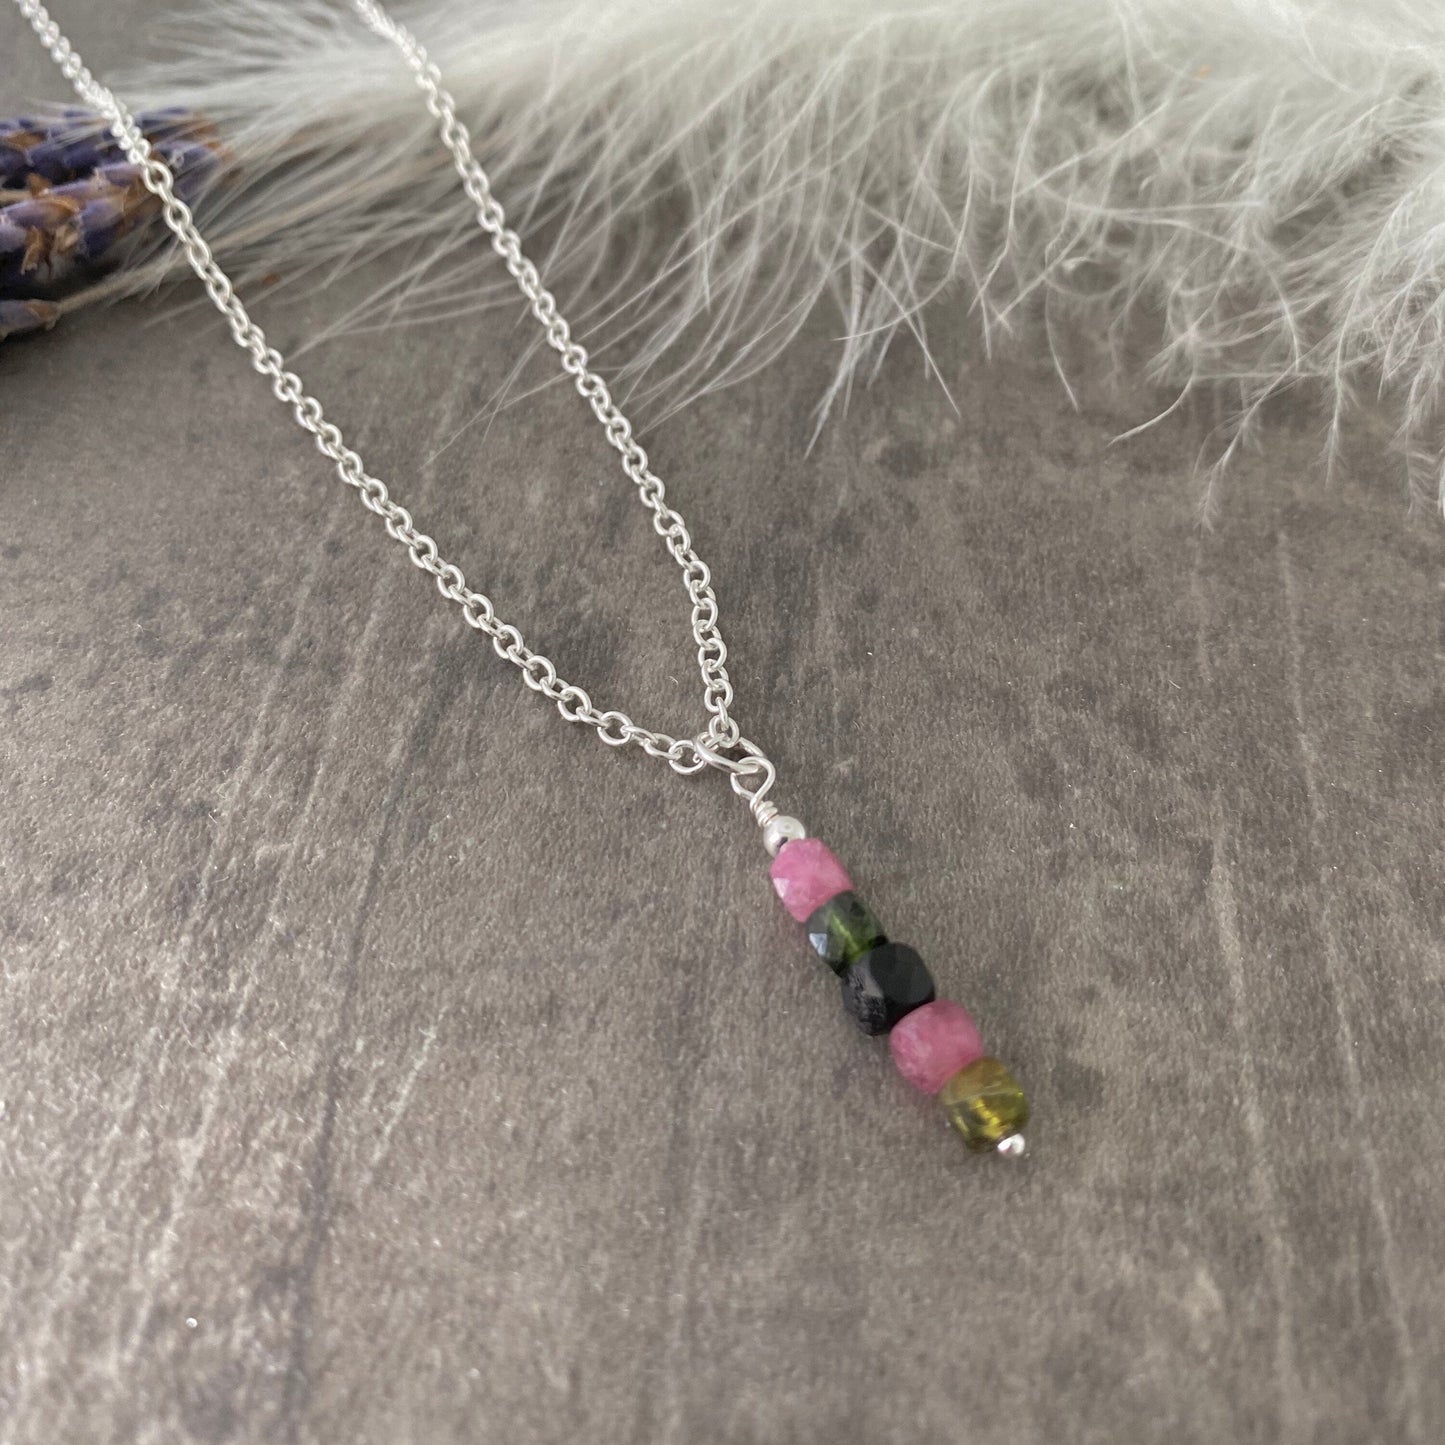 Dainty Tourmaline necklace, October birthstone, sterling silver faceted pendant gemstone necklace